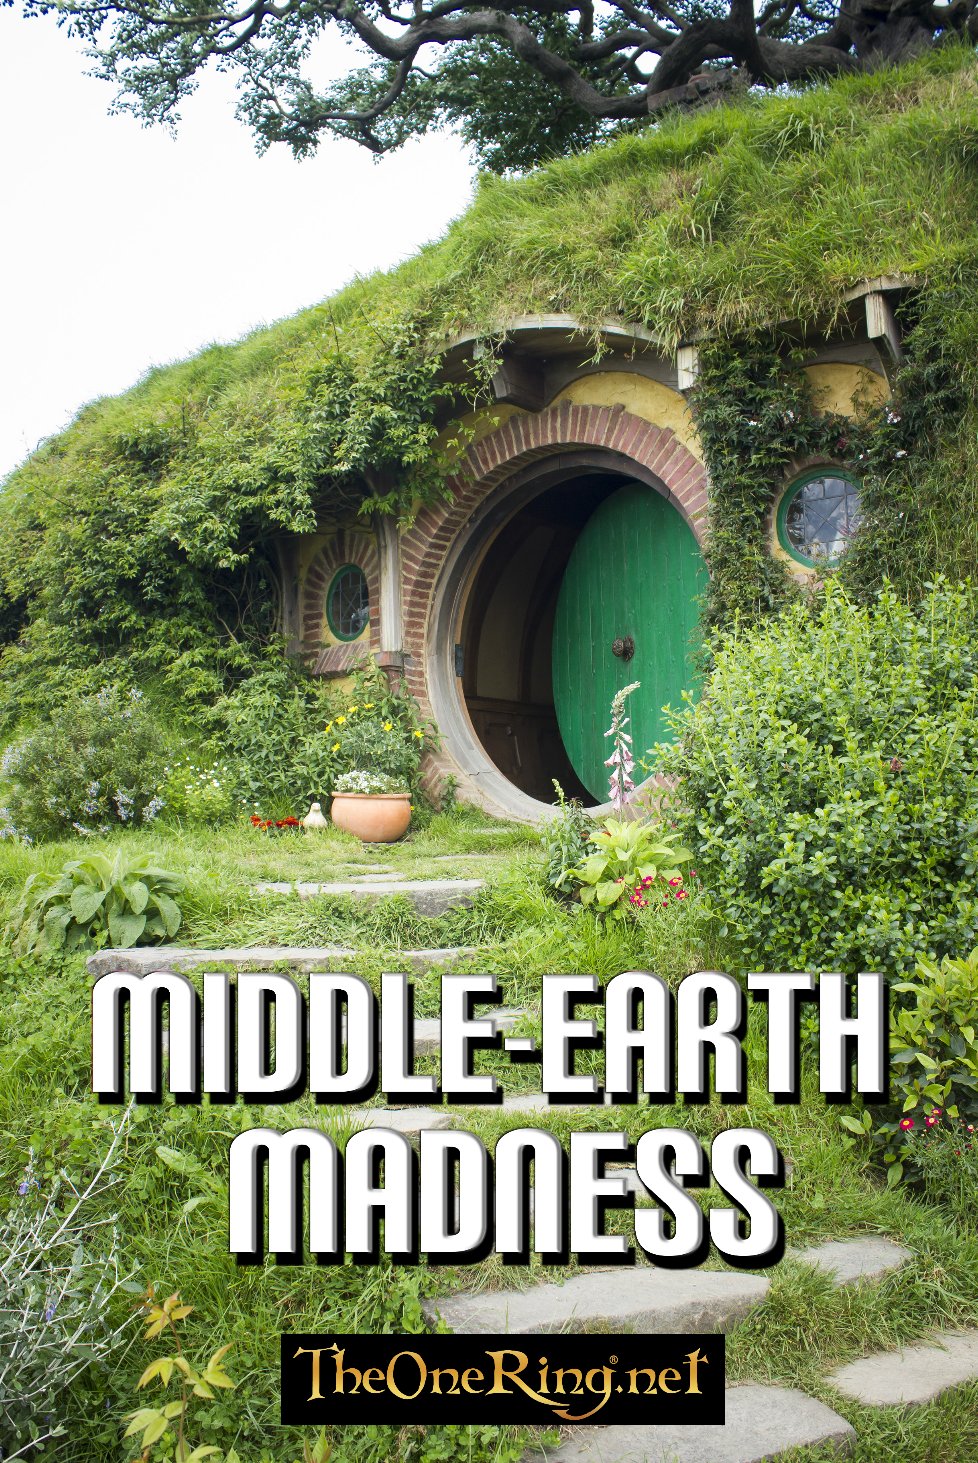 Middle-earth Madness